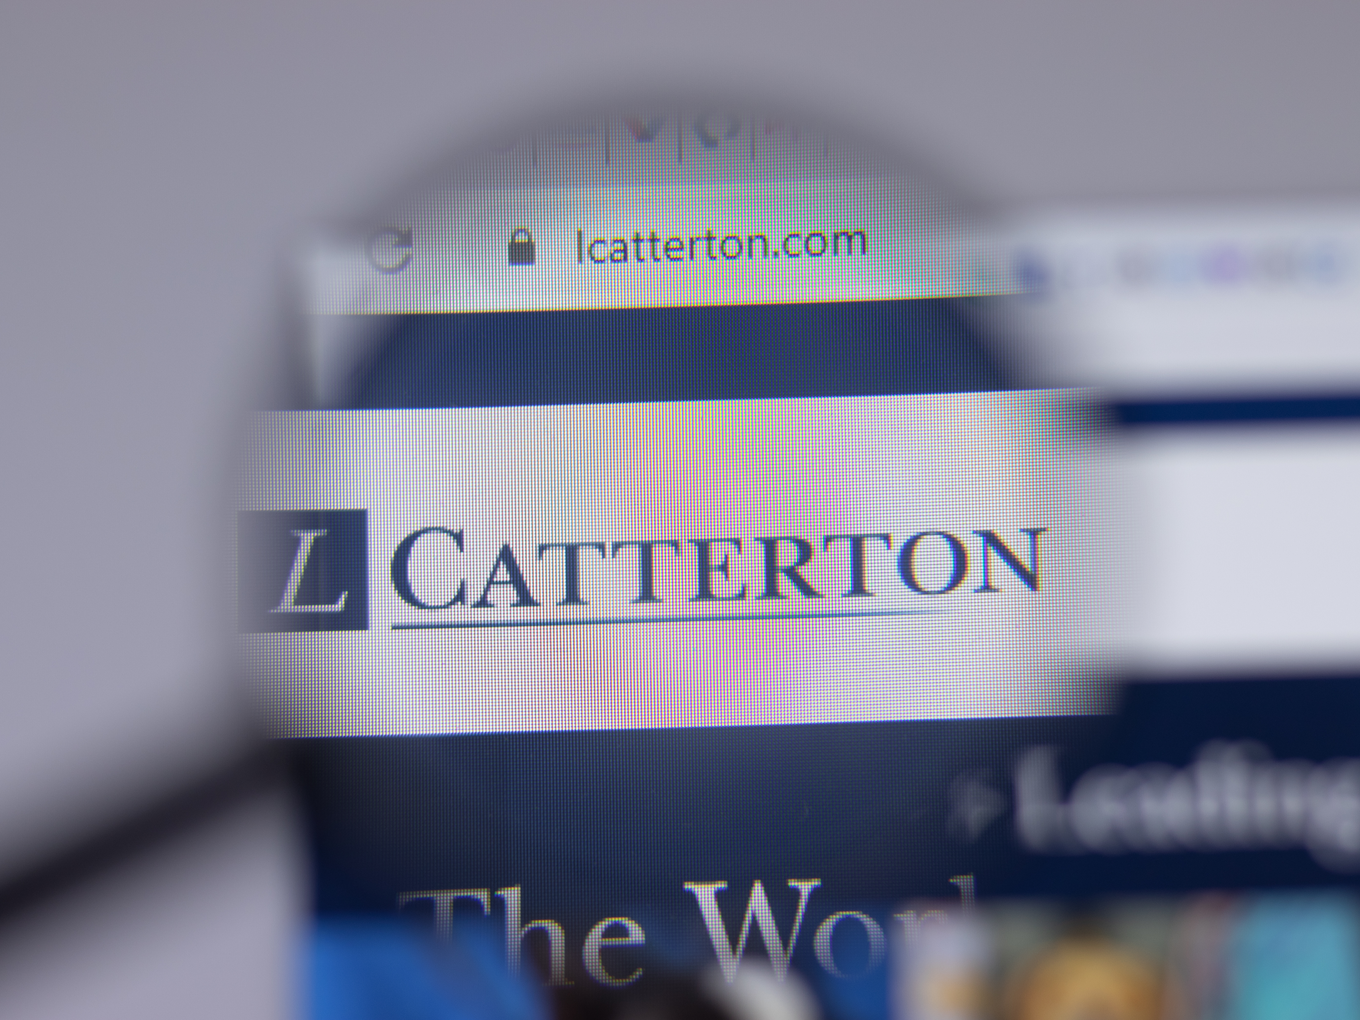 L CATTERTON ACQUIRES CONTROLLING INTEREST IN JUST OVER THE TOP